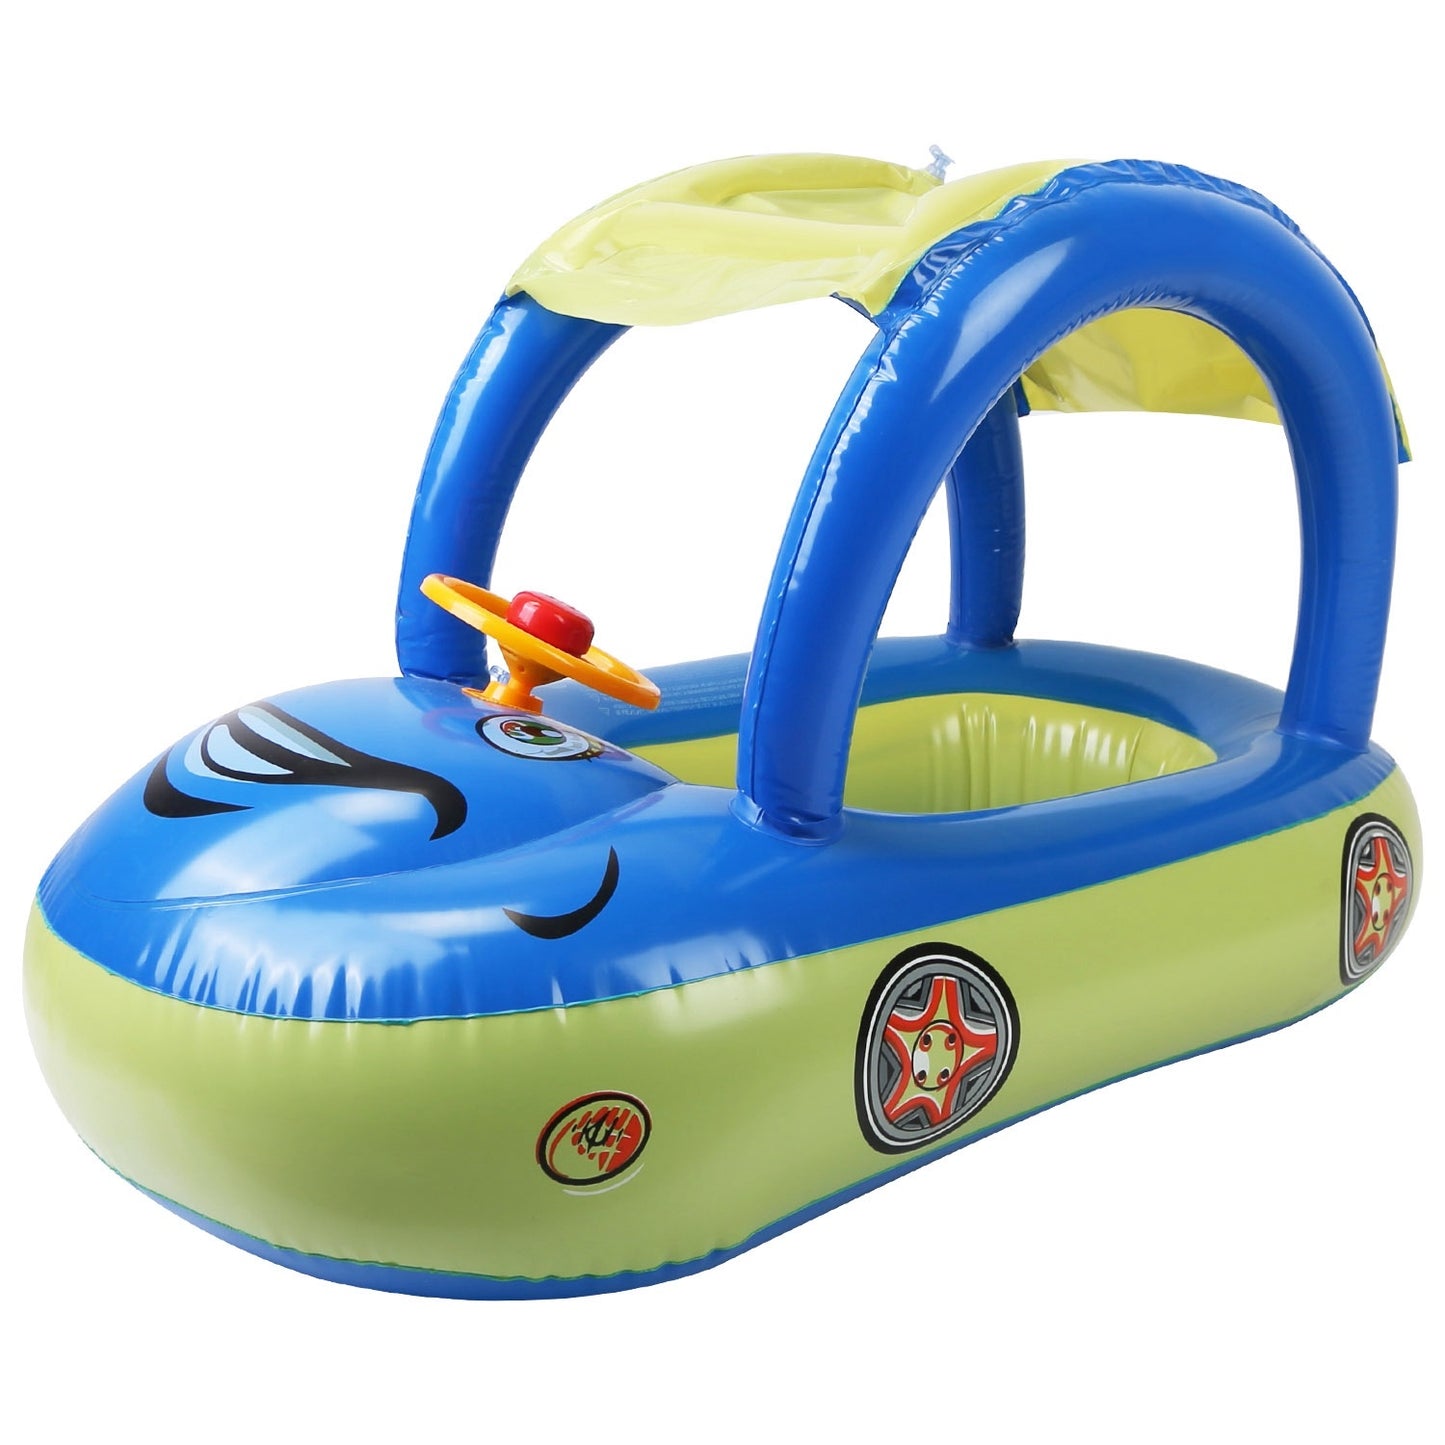 Baby Inflatable Pool Float Car Shaped Toddler Swimming Float Boat Pool Toy Infant Swim Ring Pool with Sun Protection Canopy for 1-3 Year-Old Kids Infant Toddlers